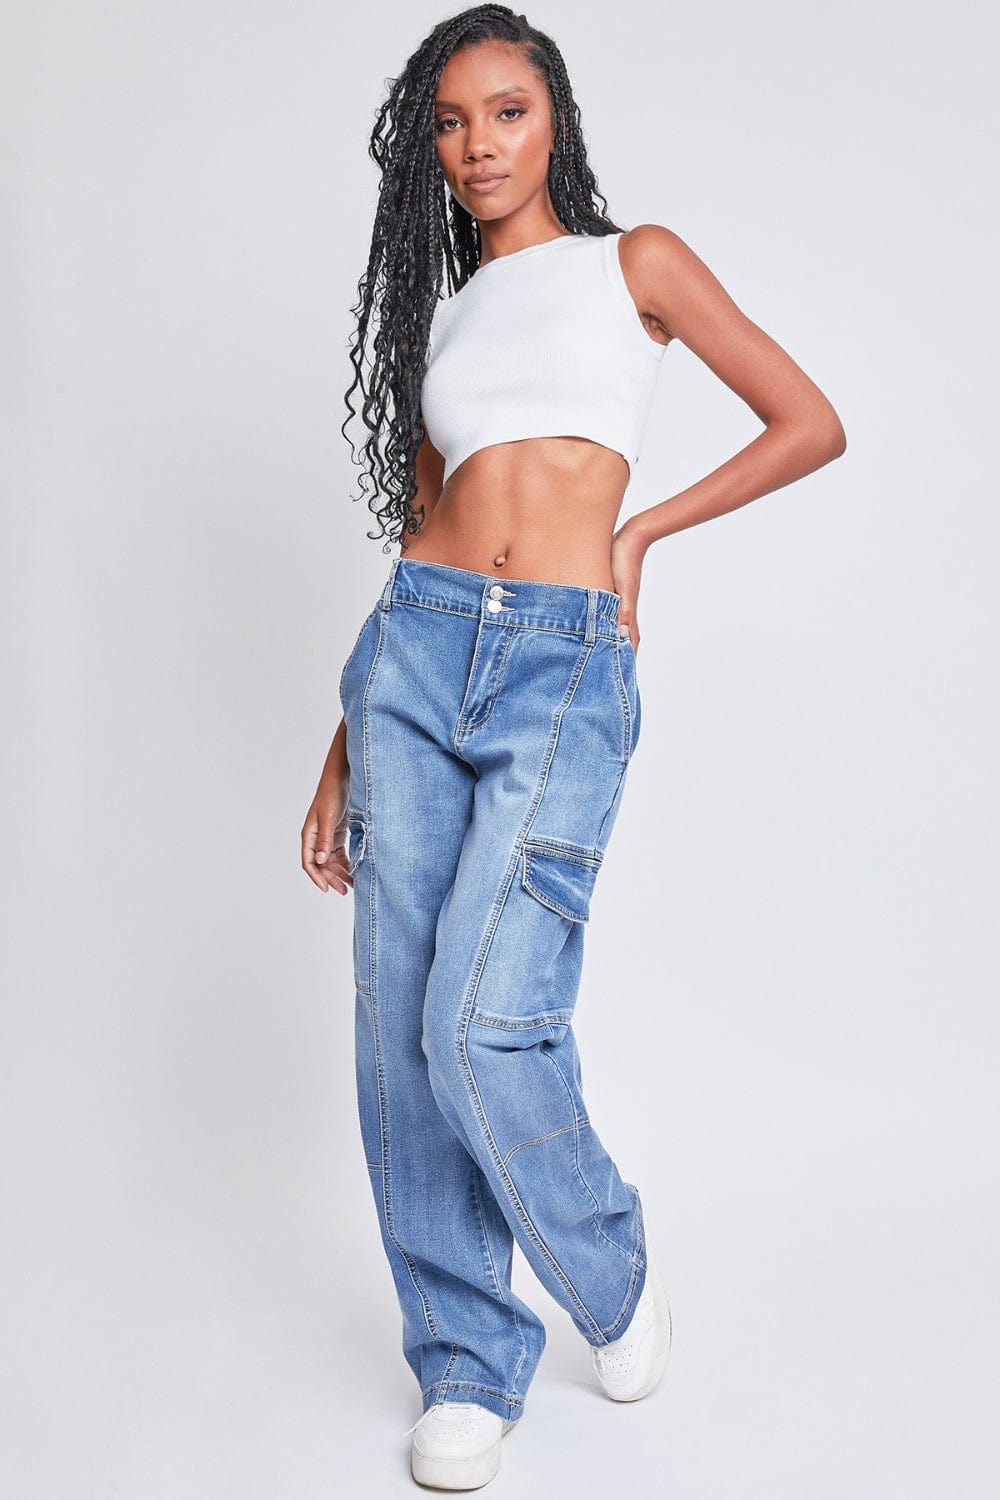 The802Gypsy Bottoms/Jeans ❤️GYPSY-YMI Jeanswear- High-Rise Straight Cargo Jeans